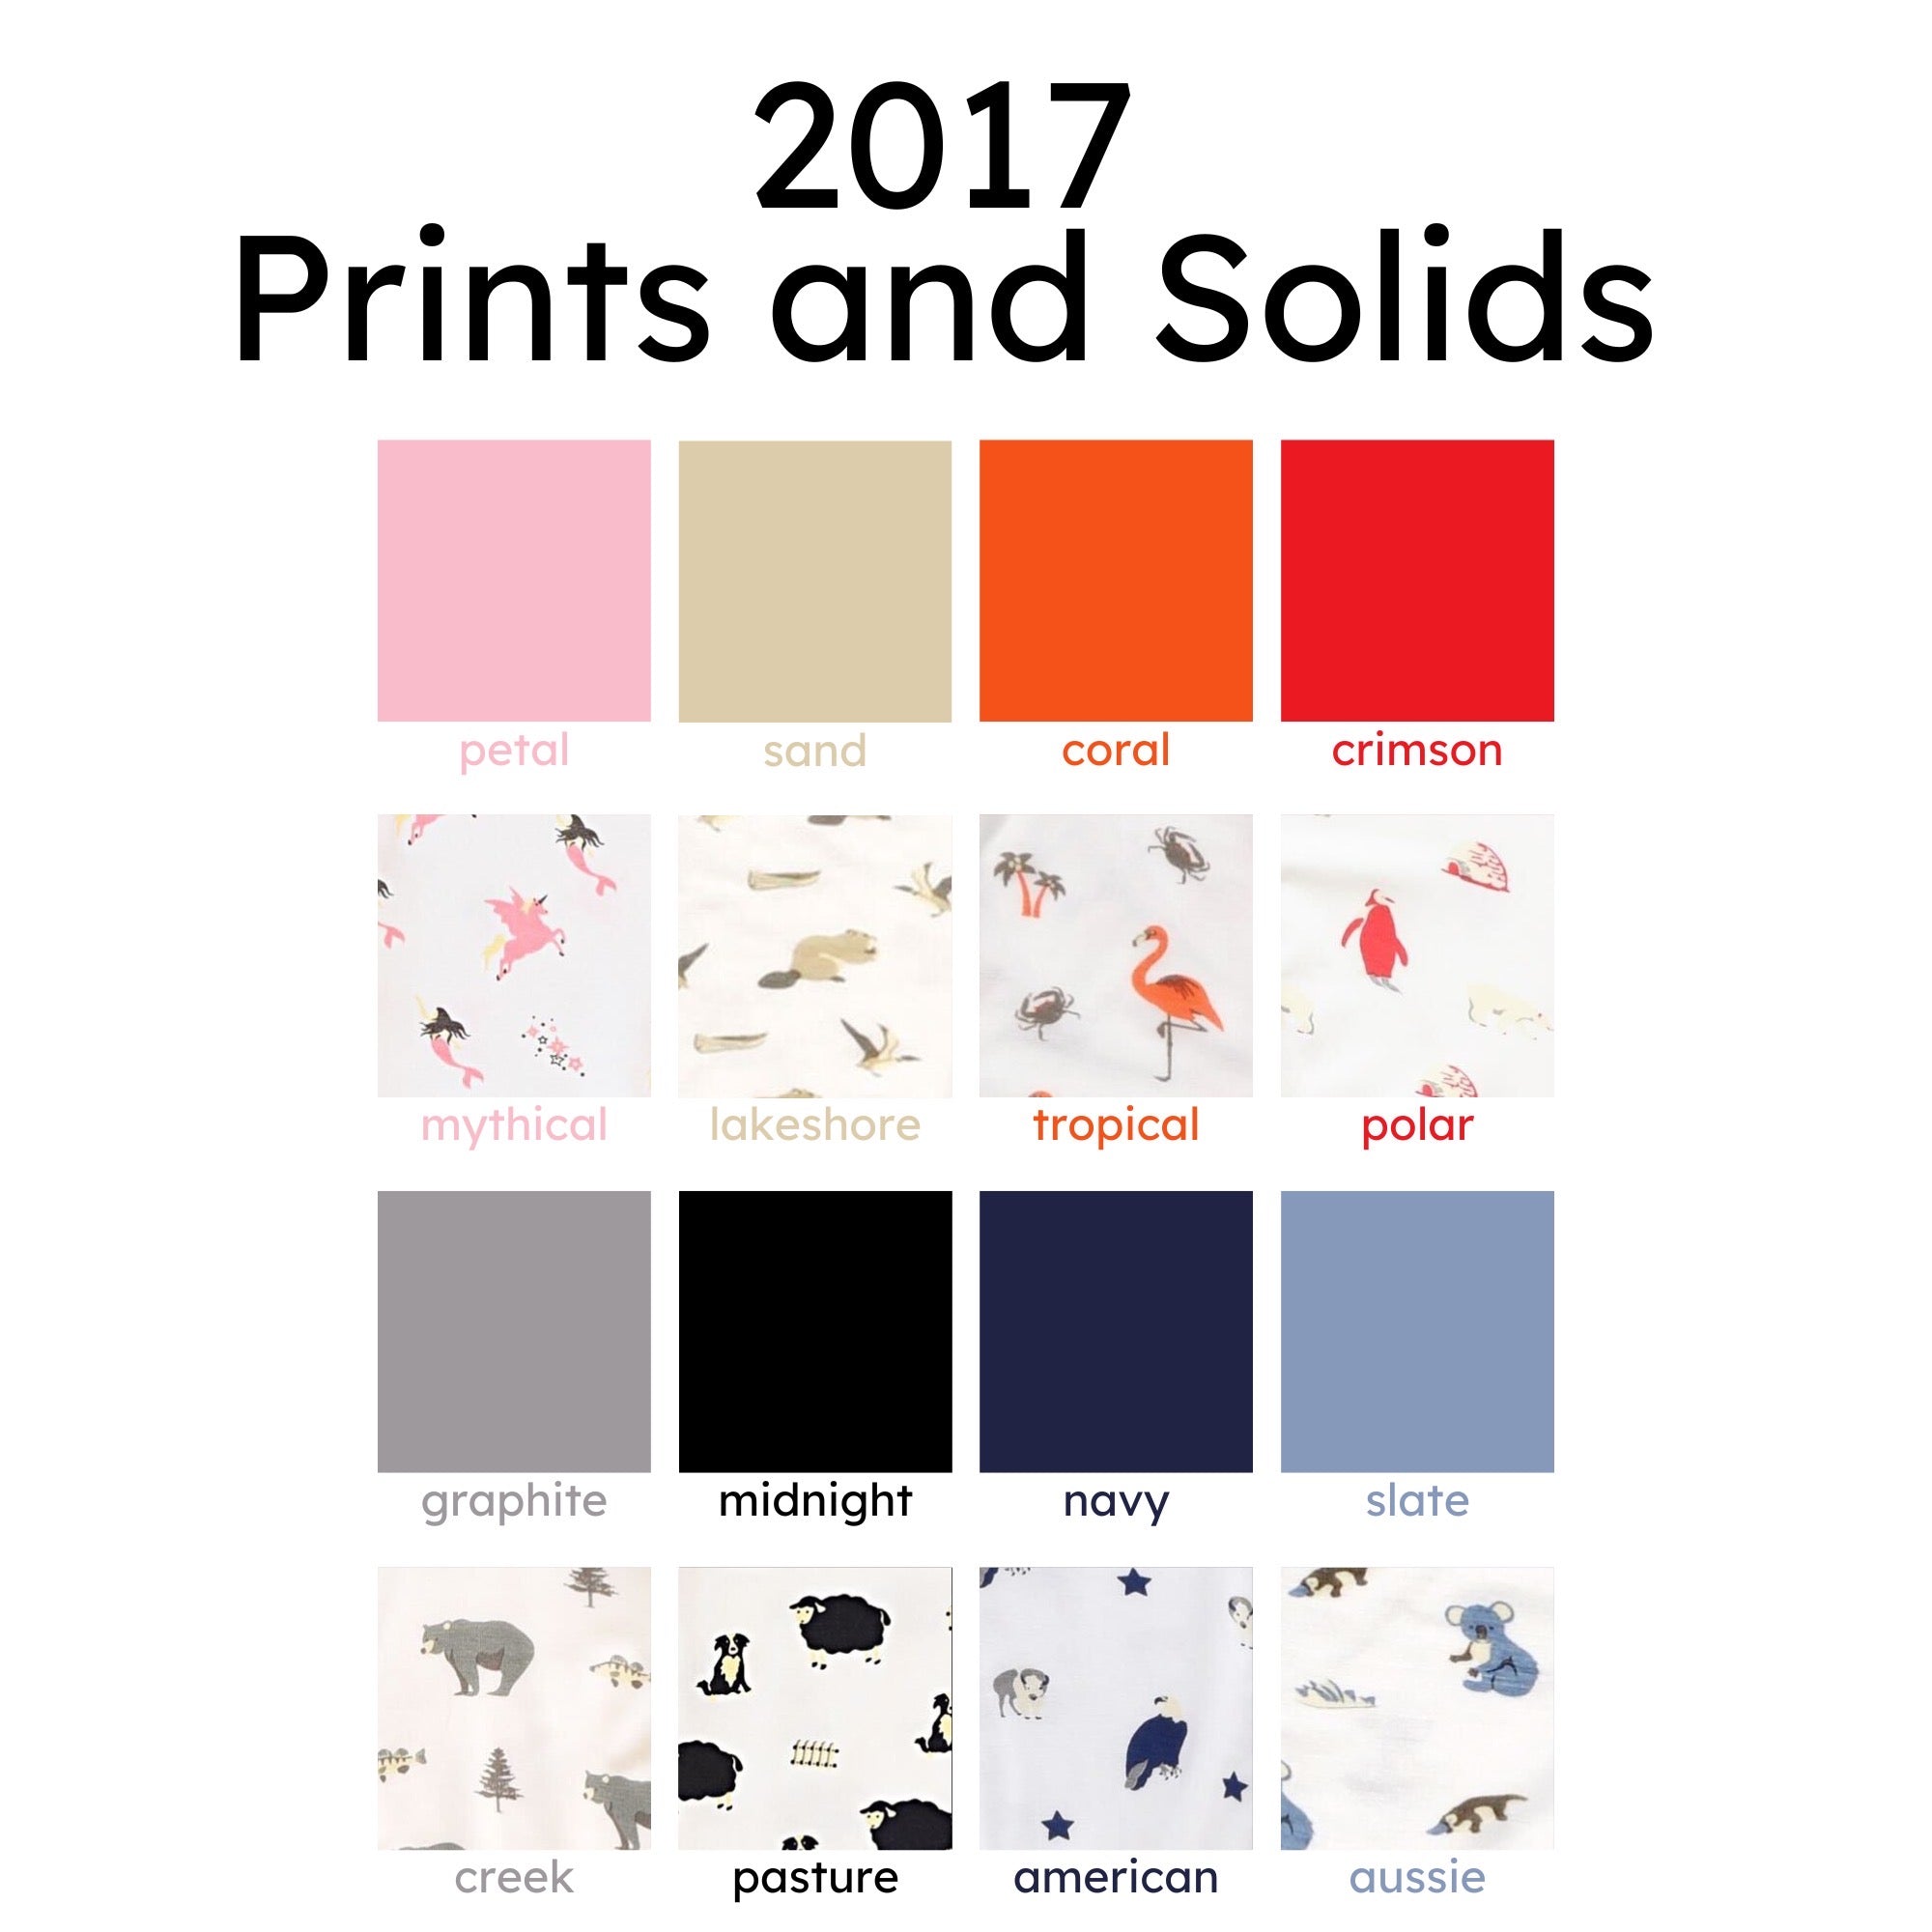 2017 prints and solids